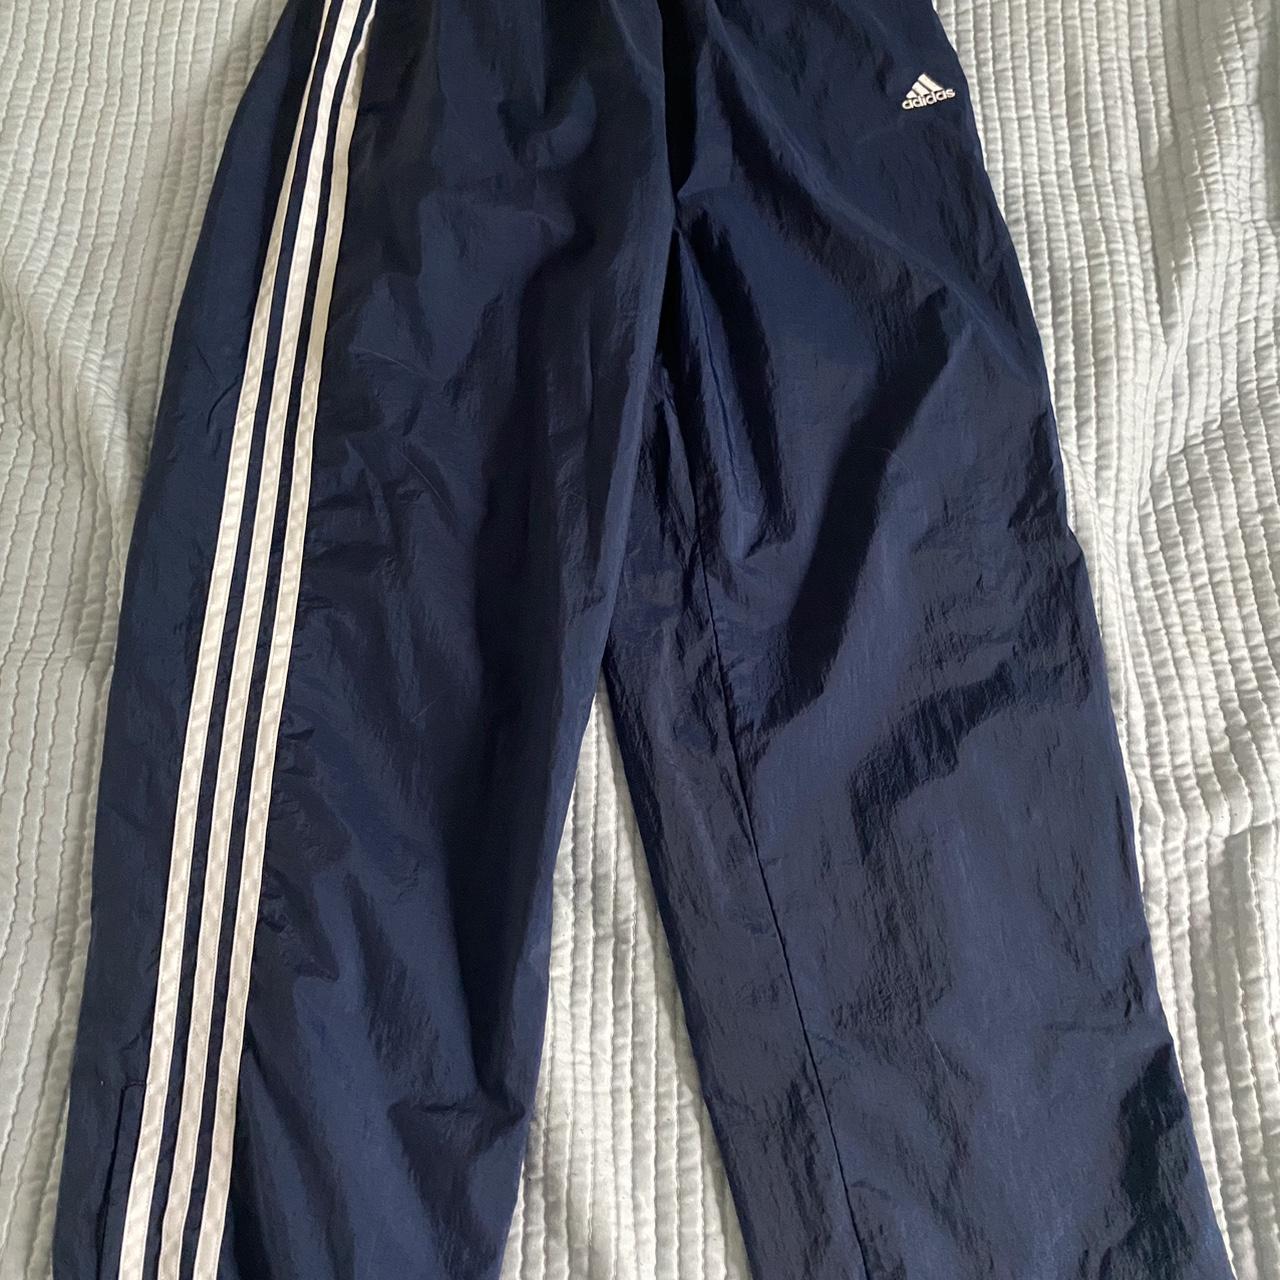 Adidas Men's Navy and White Joggers-tracksuits | Depop